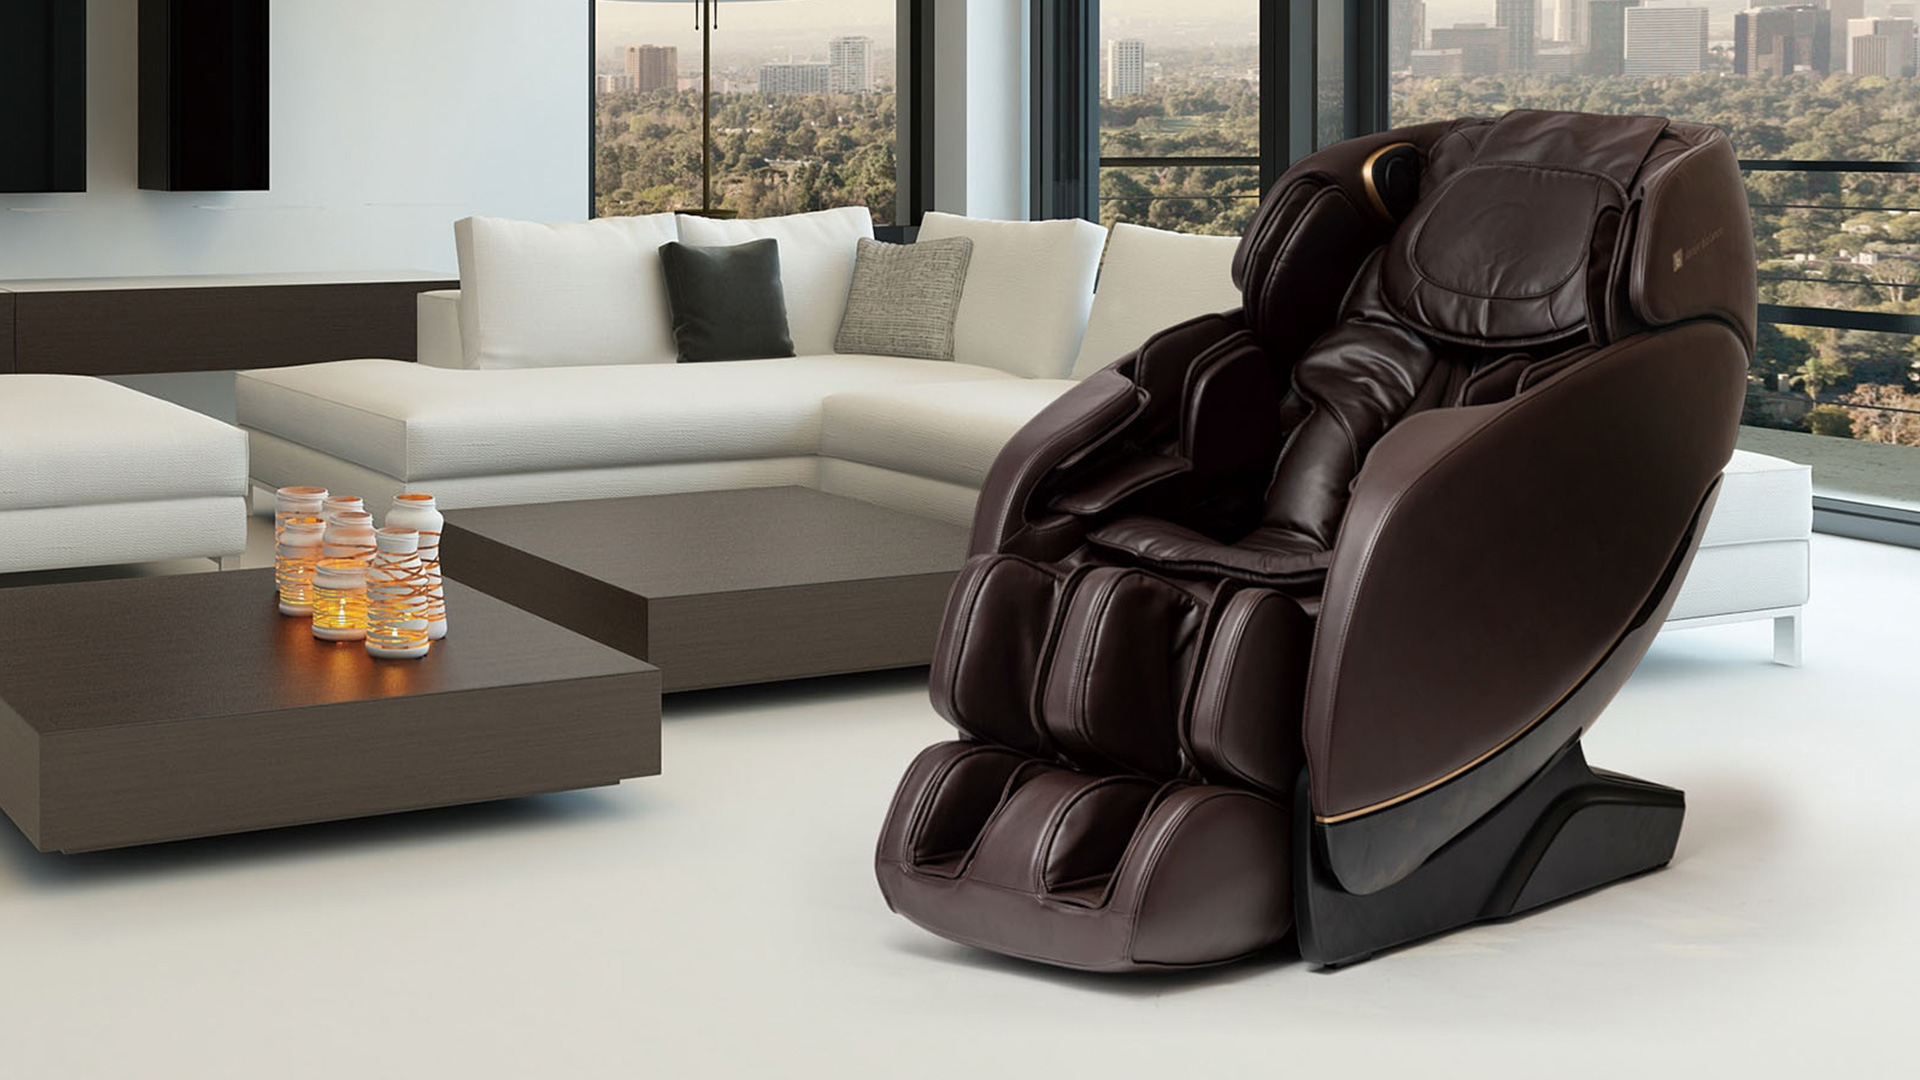 Jin 2 massage chair in living room